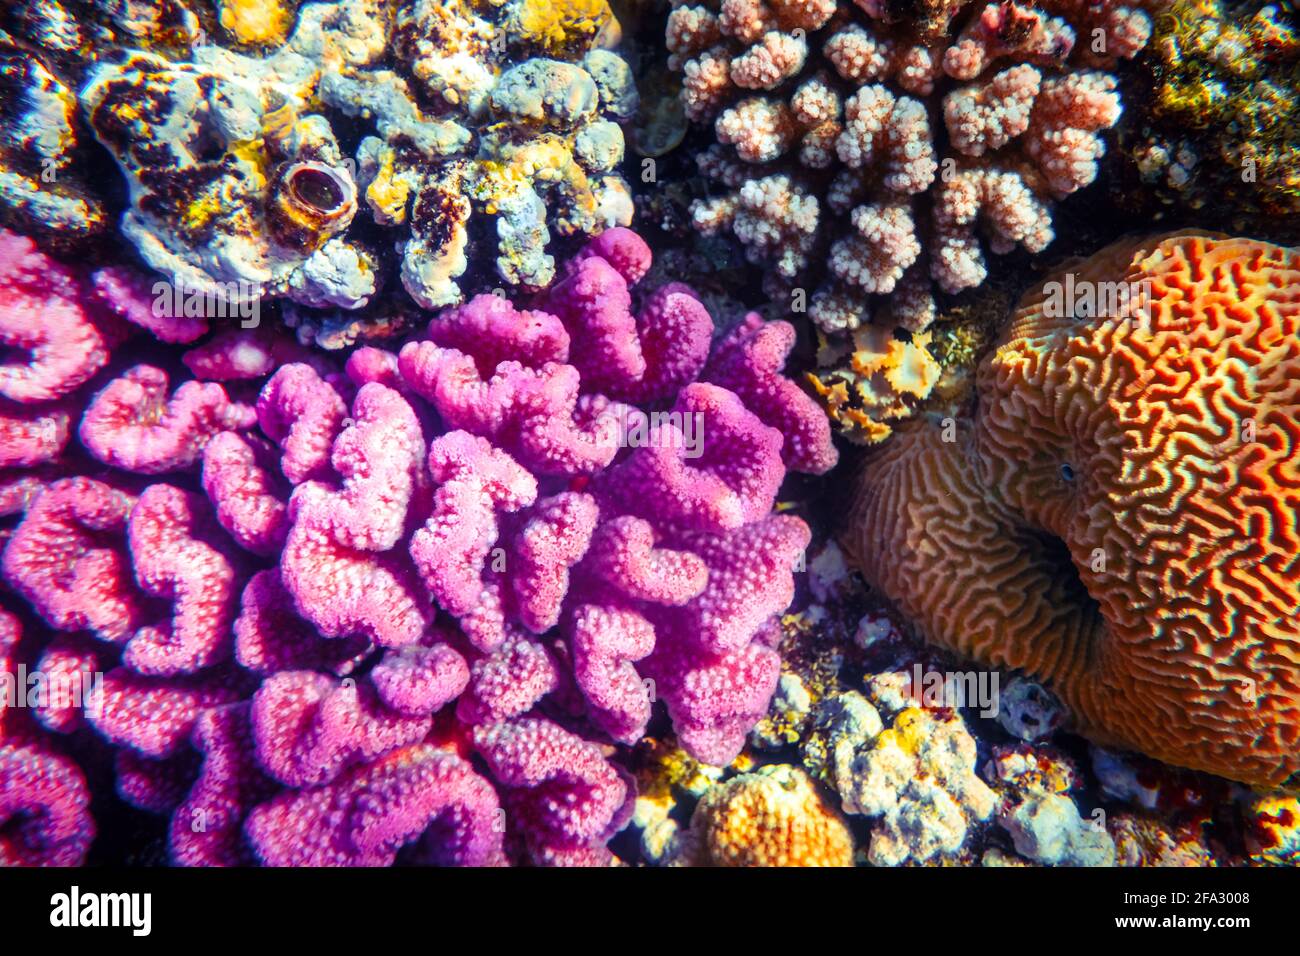 Coral reef colony in Red sea in Egypt Stock Photo